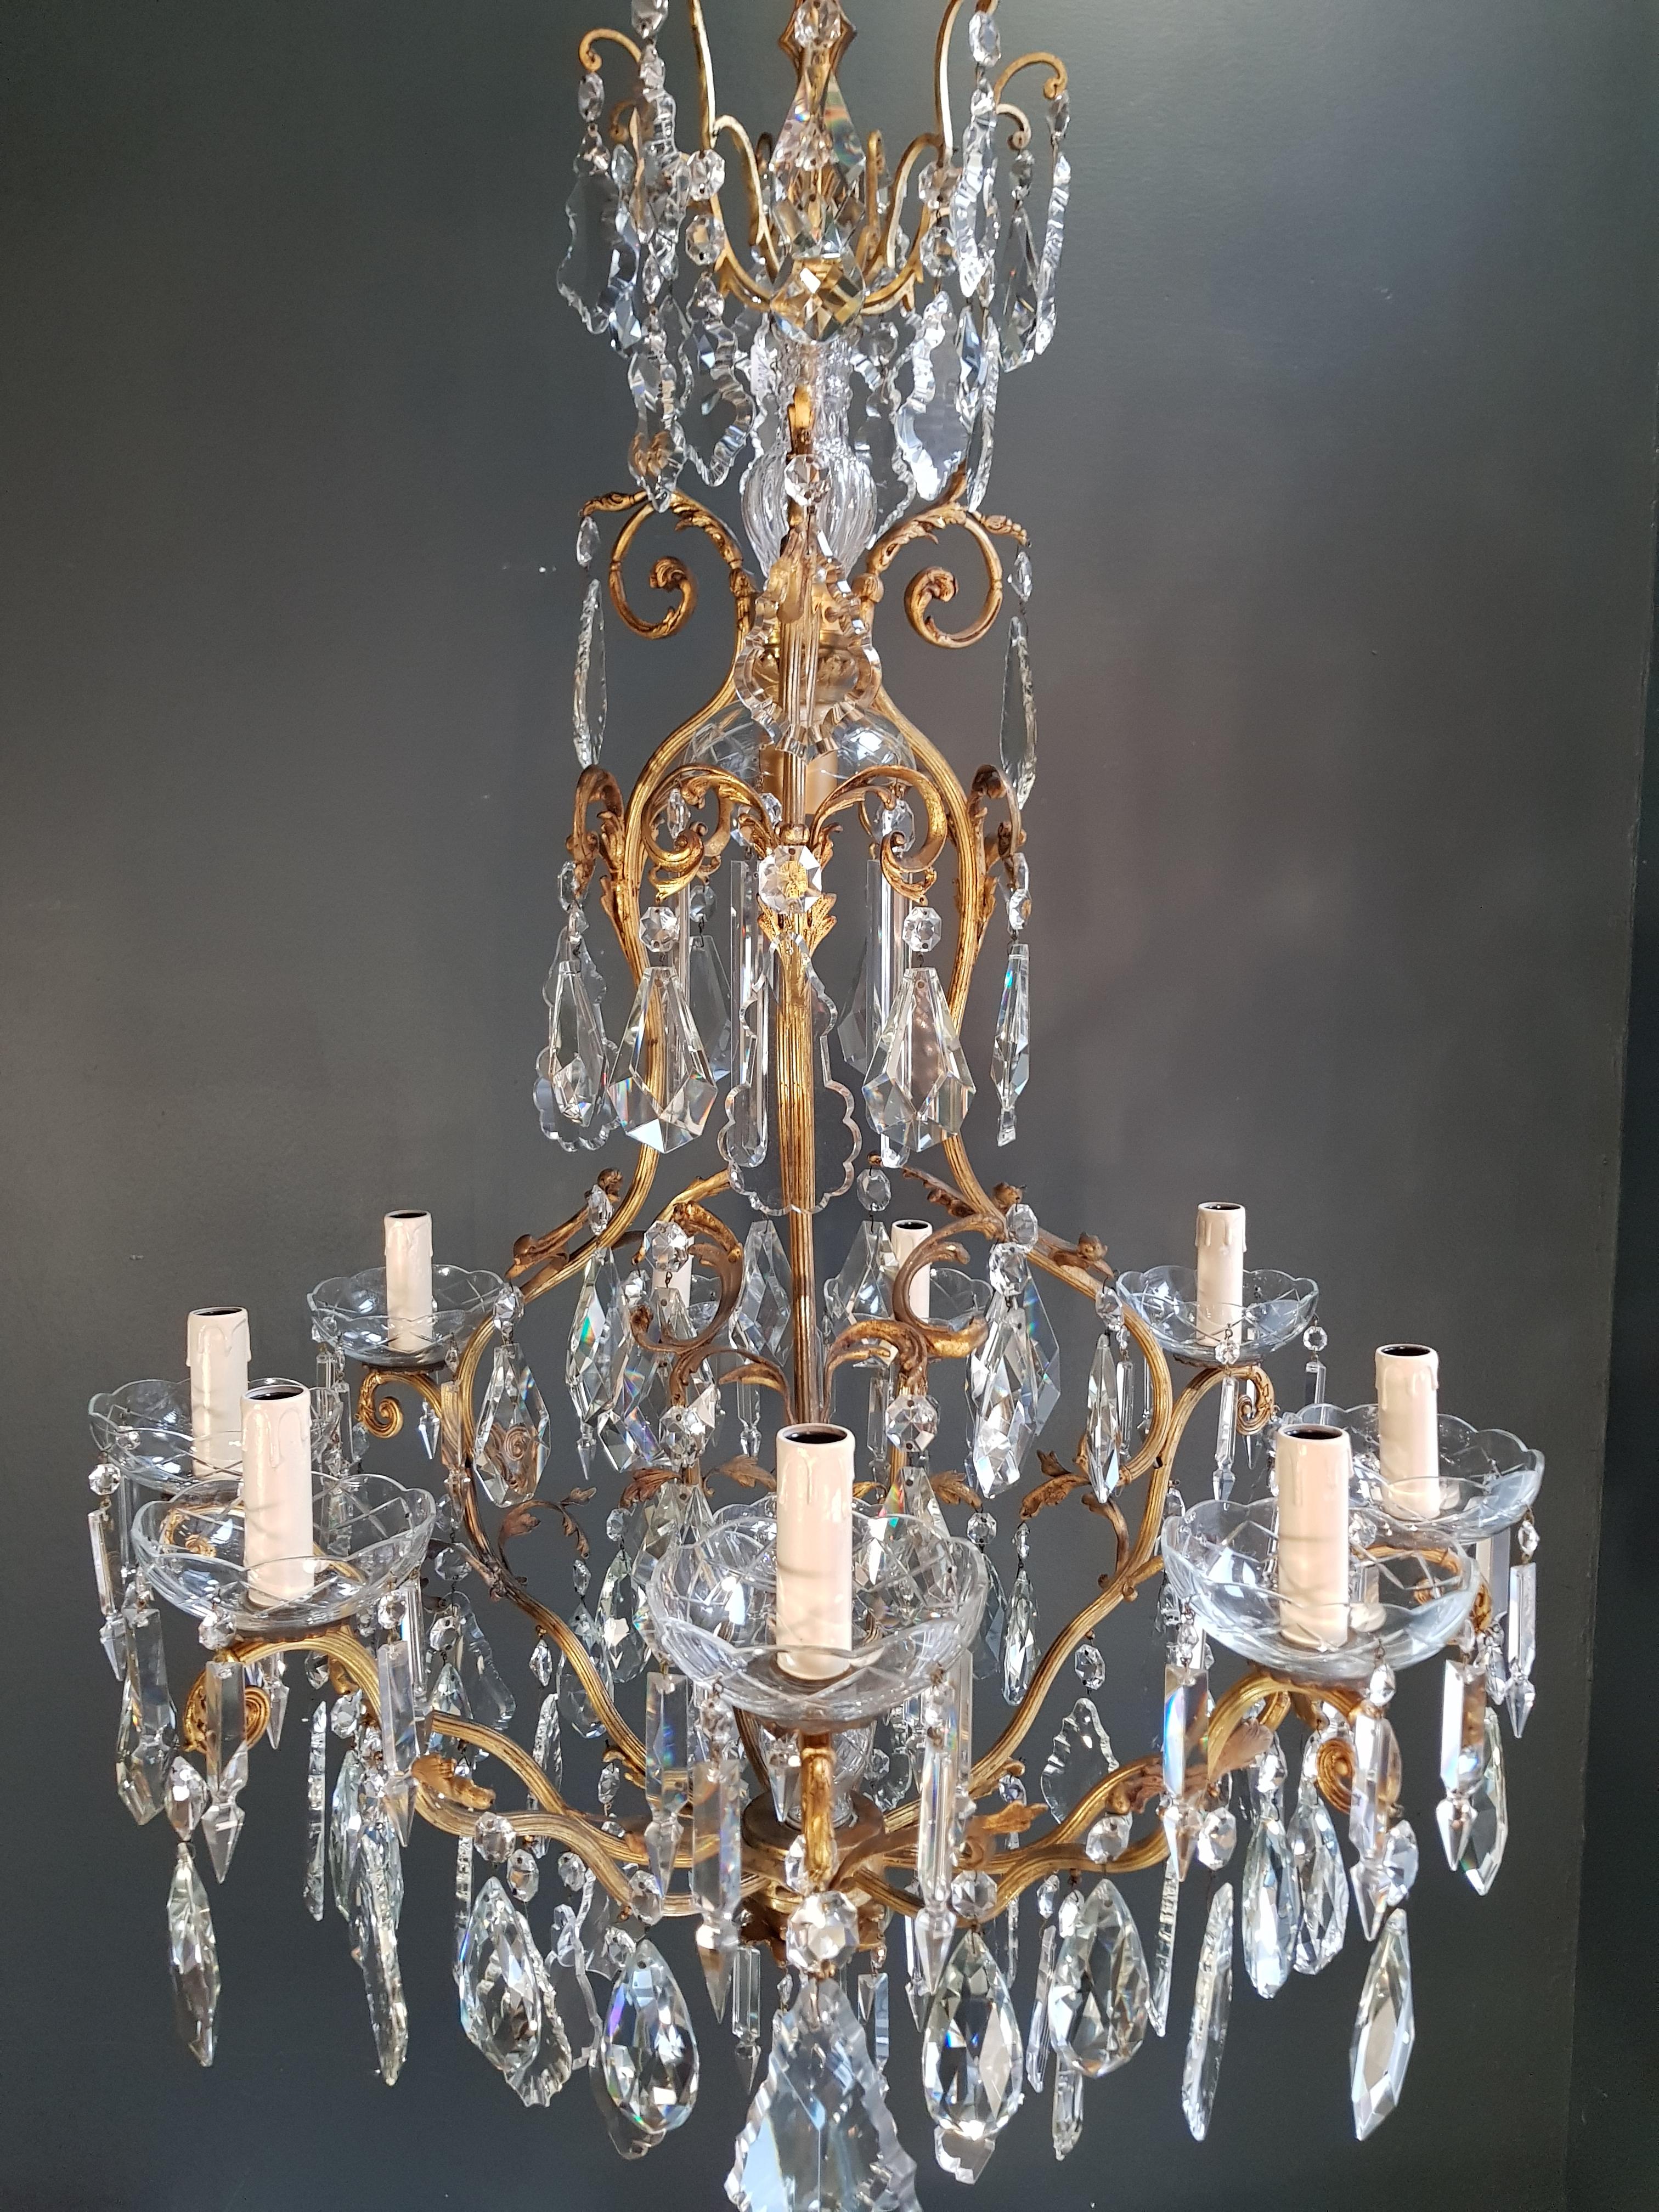 Hand-Crafted French Crystal Chandelier Antique Candelabrum Lustre Art Nouveau Rarity Brass